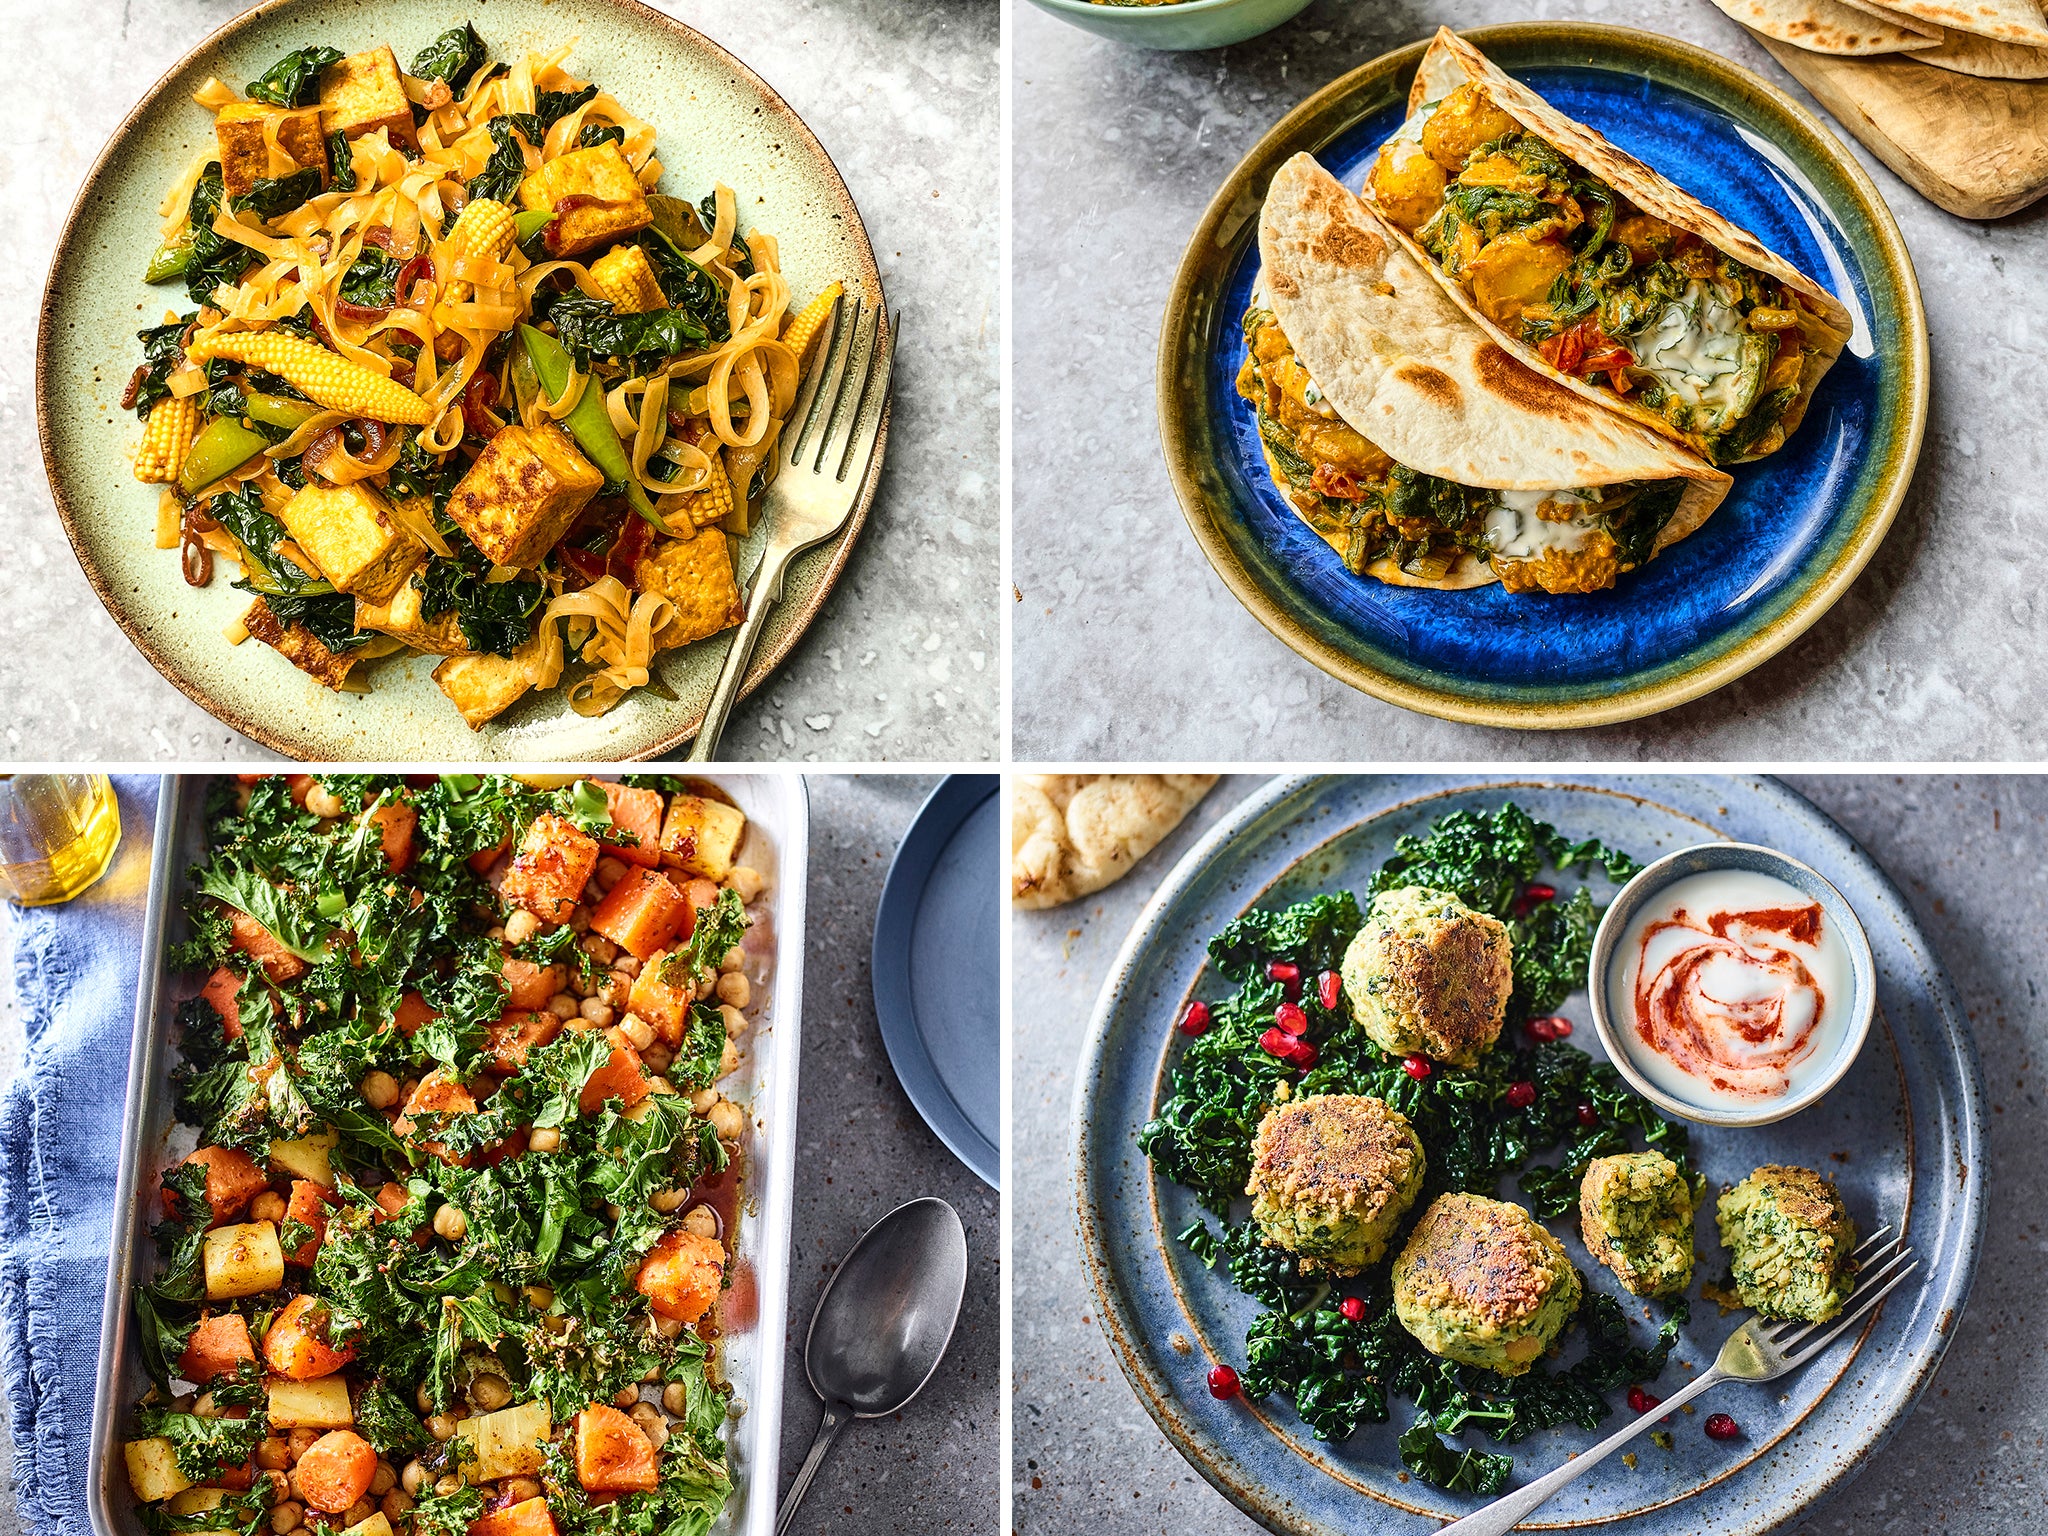 Speedy vegan dinners for lazy cooks | The Independent